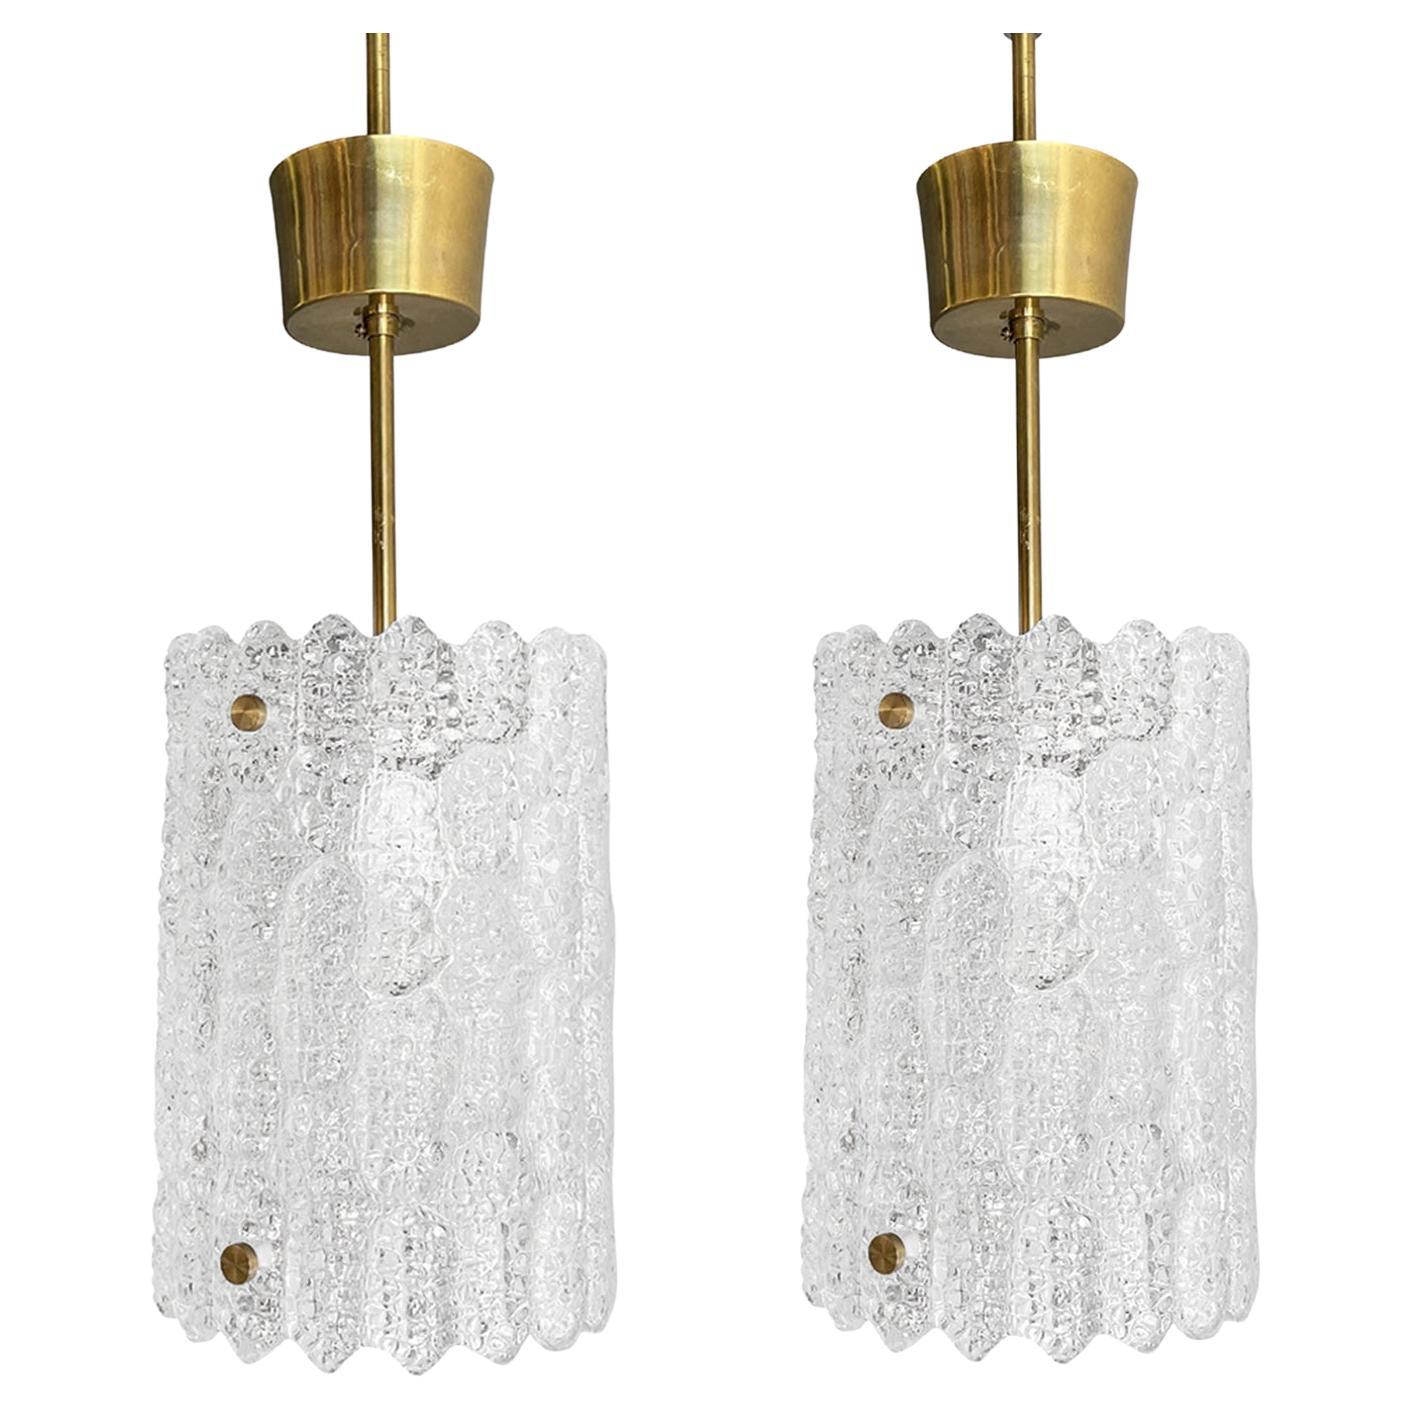 20th Century Swedish Pair of Orrefors Glass Ceiling Lights by Carl Fagerlund For Sale